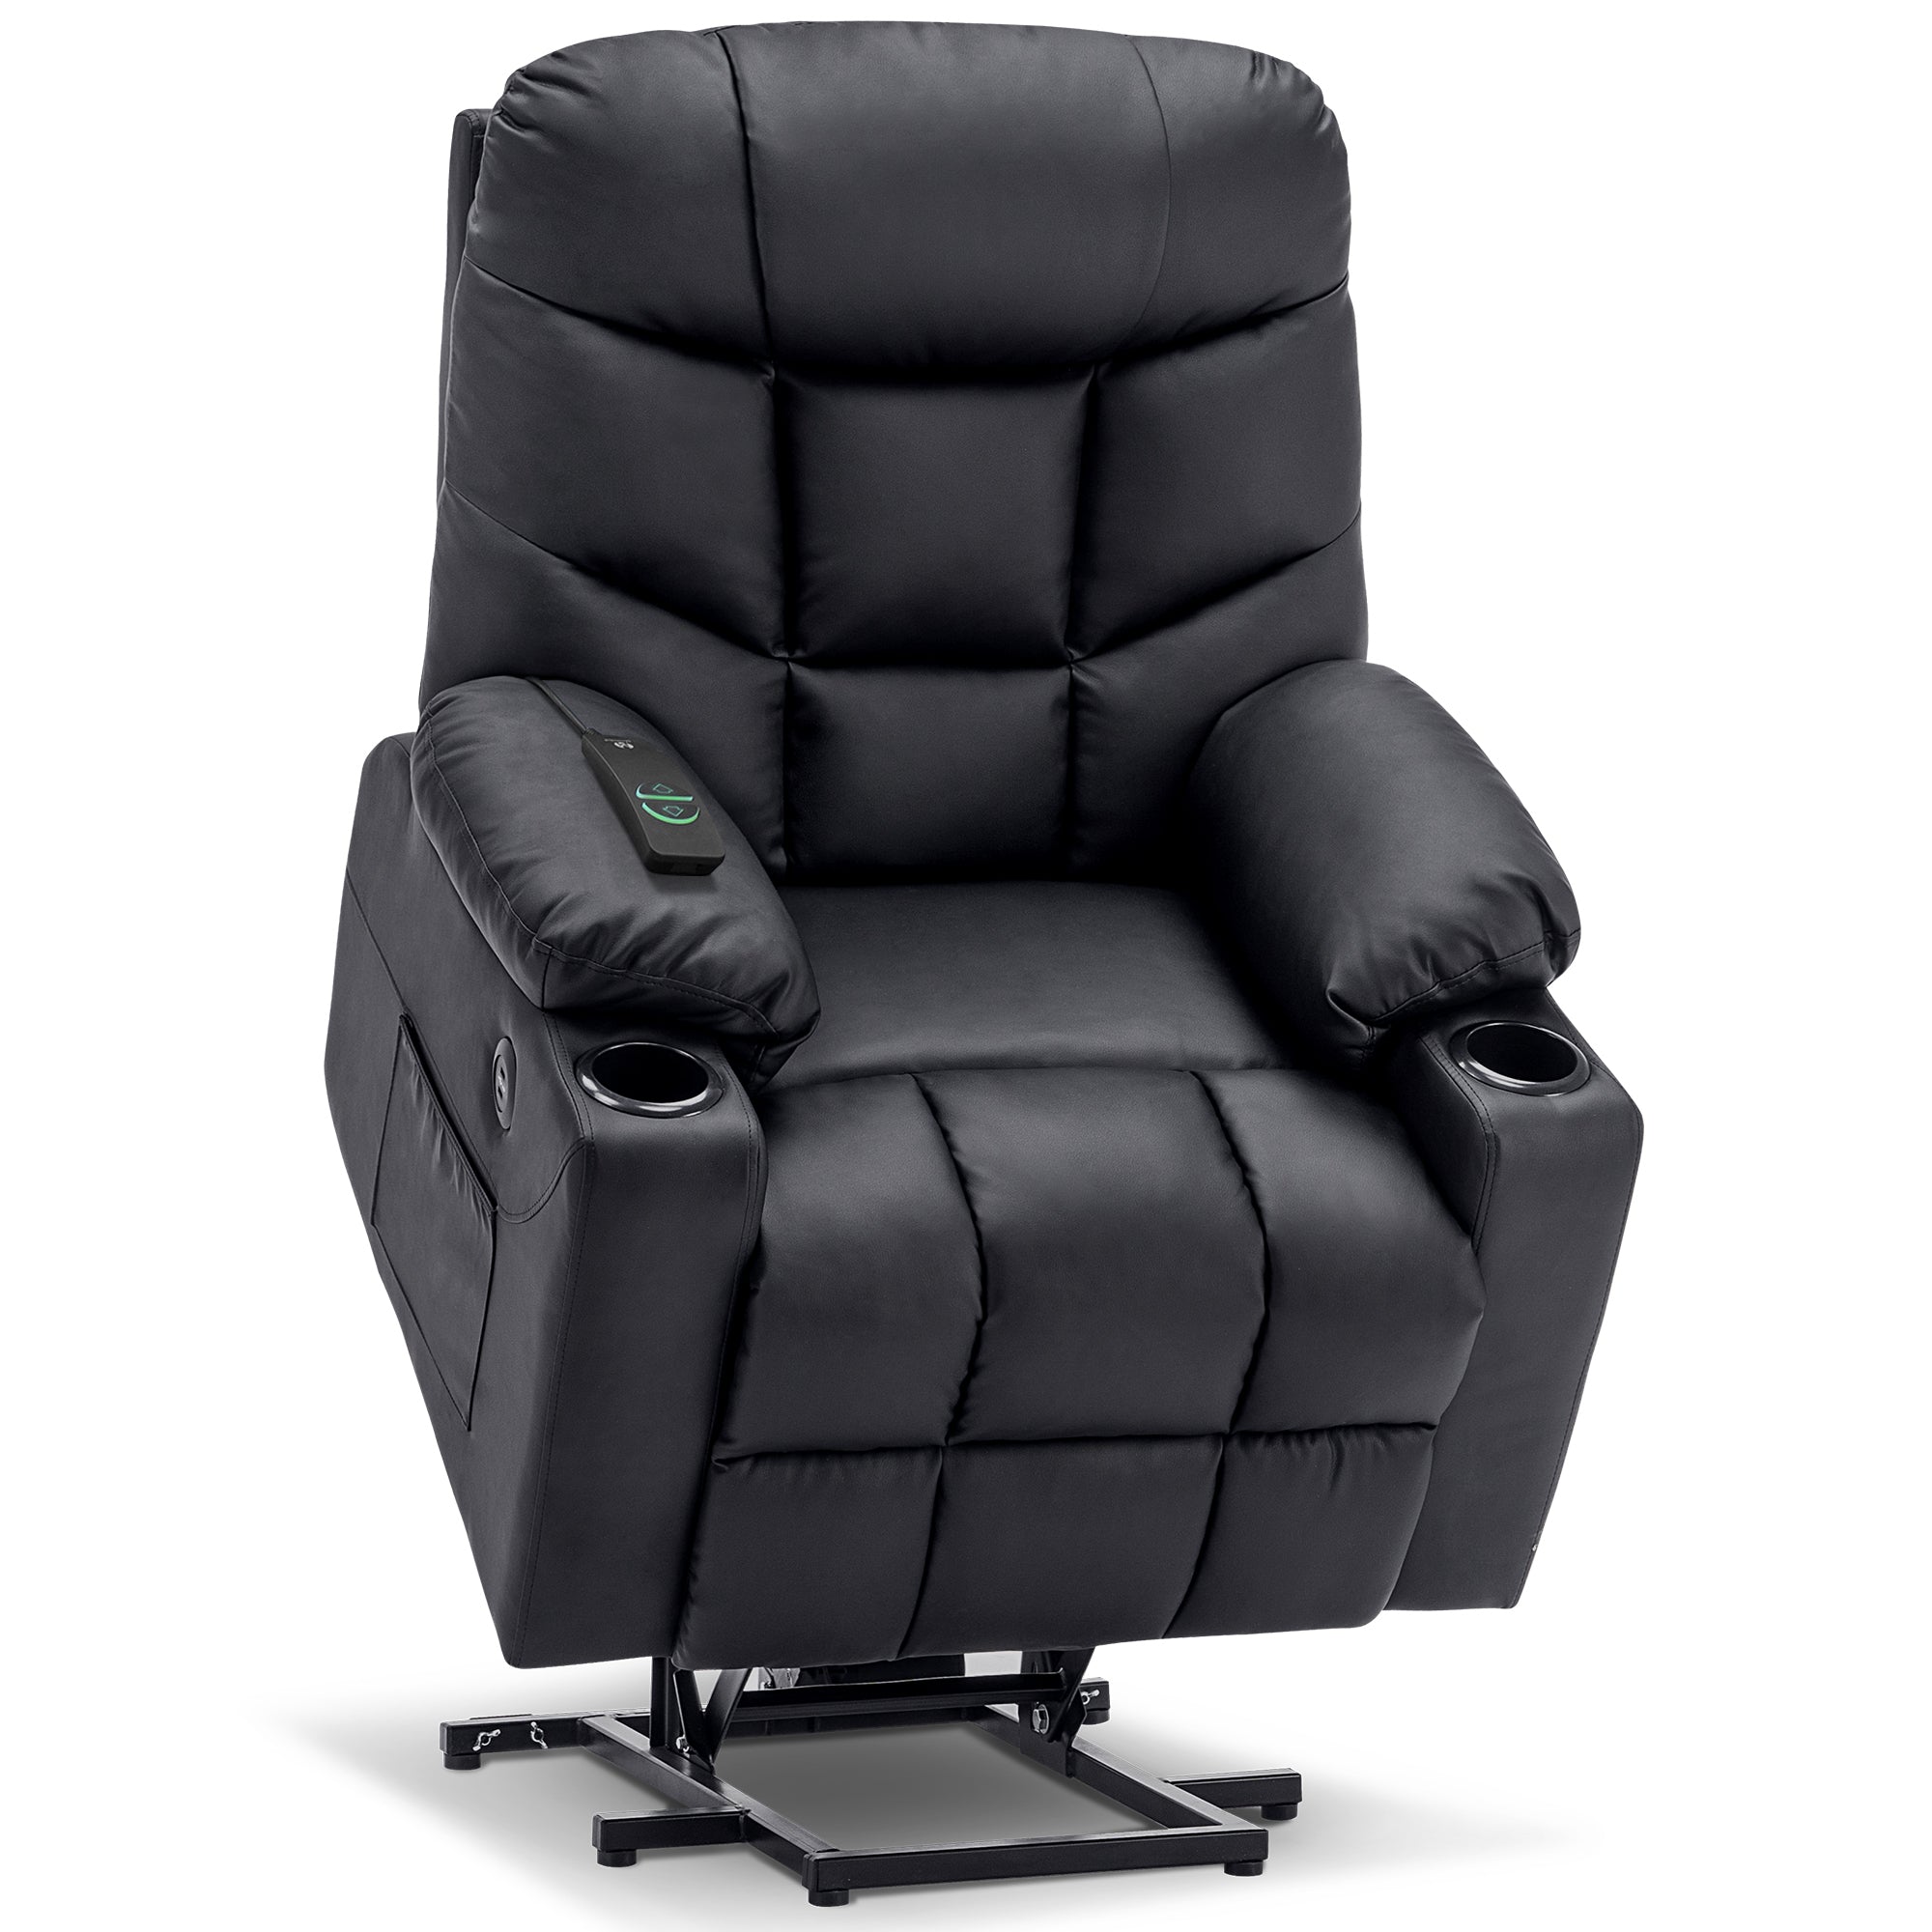 MCombo Power Lift Recliner Chair for Elderly, 3 Positions, 2 Side Pockets and Cup Holders, USB Ports, Faux Leather 7288 Series